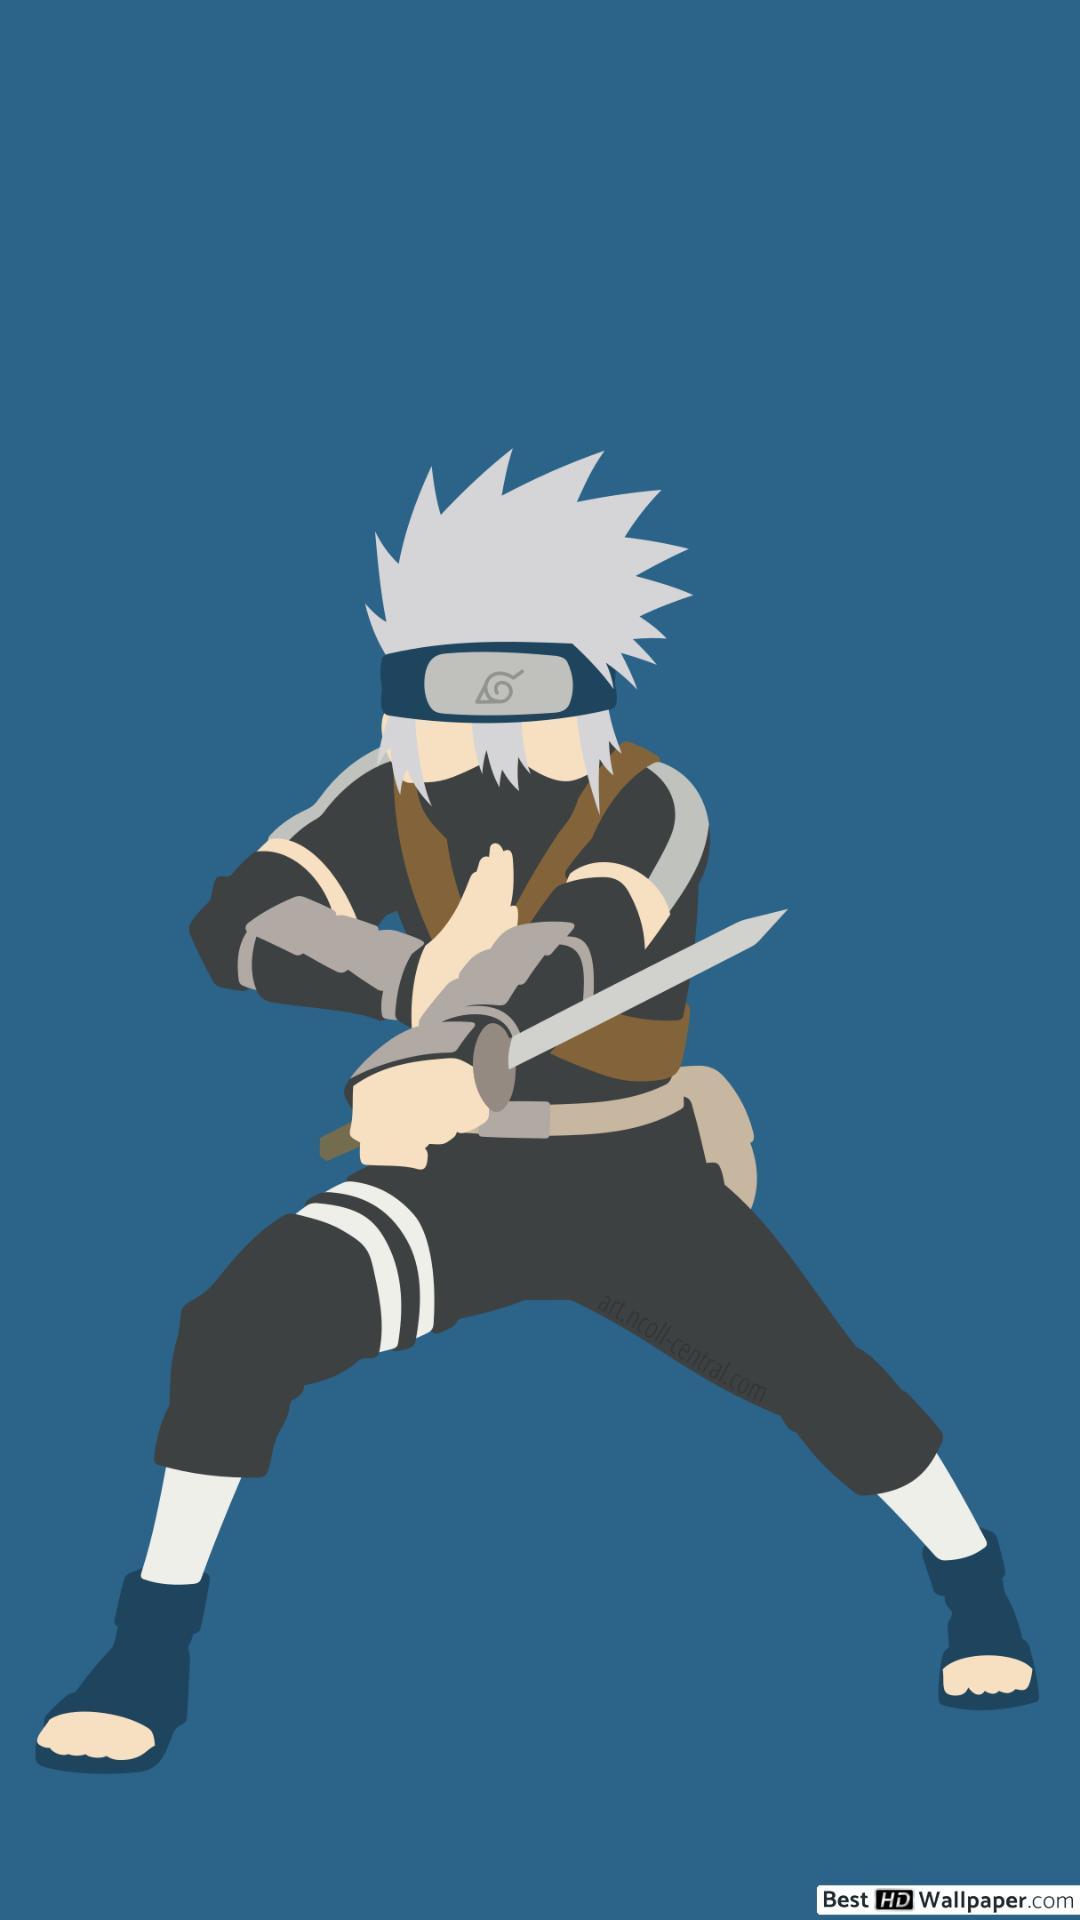 Aesthetic Naruto Wallpapers - Wallpaper Cave